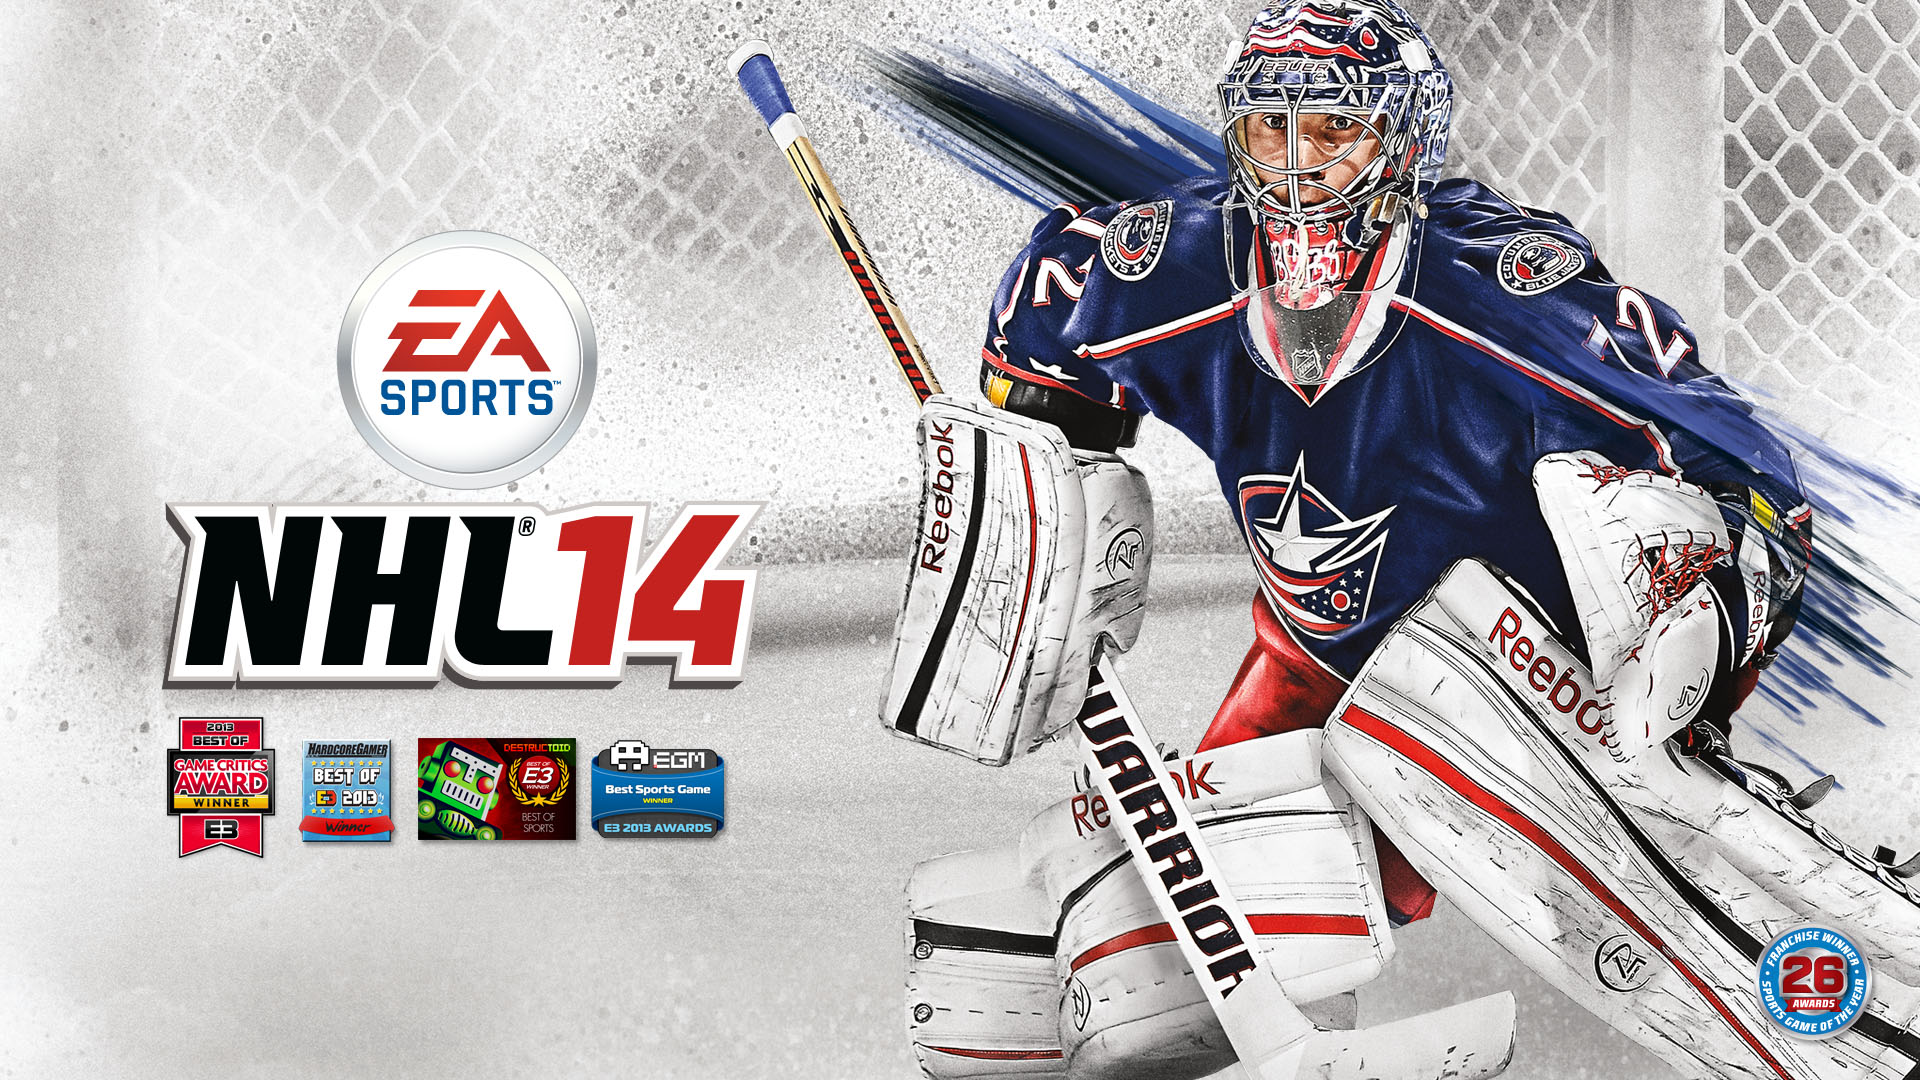 NHL 14 hits store shelves on September 10th, only on PlayStation 3 and Xbox 360. Available for a limited time, be sure to check out our NHL 14 Pre-Order ...